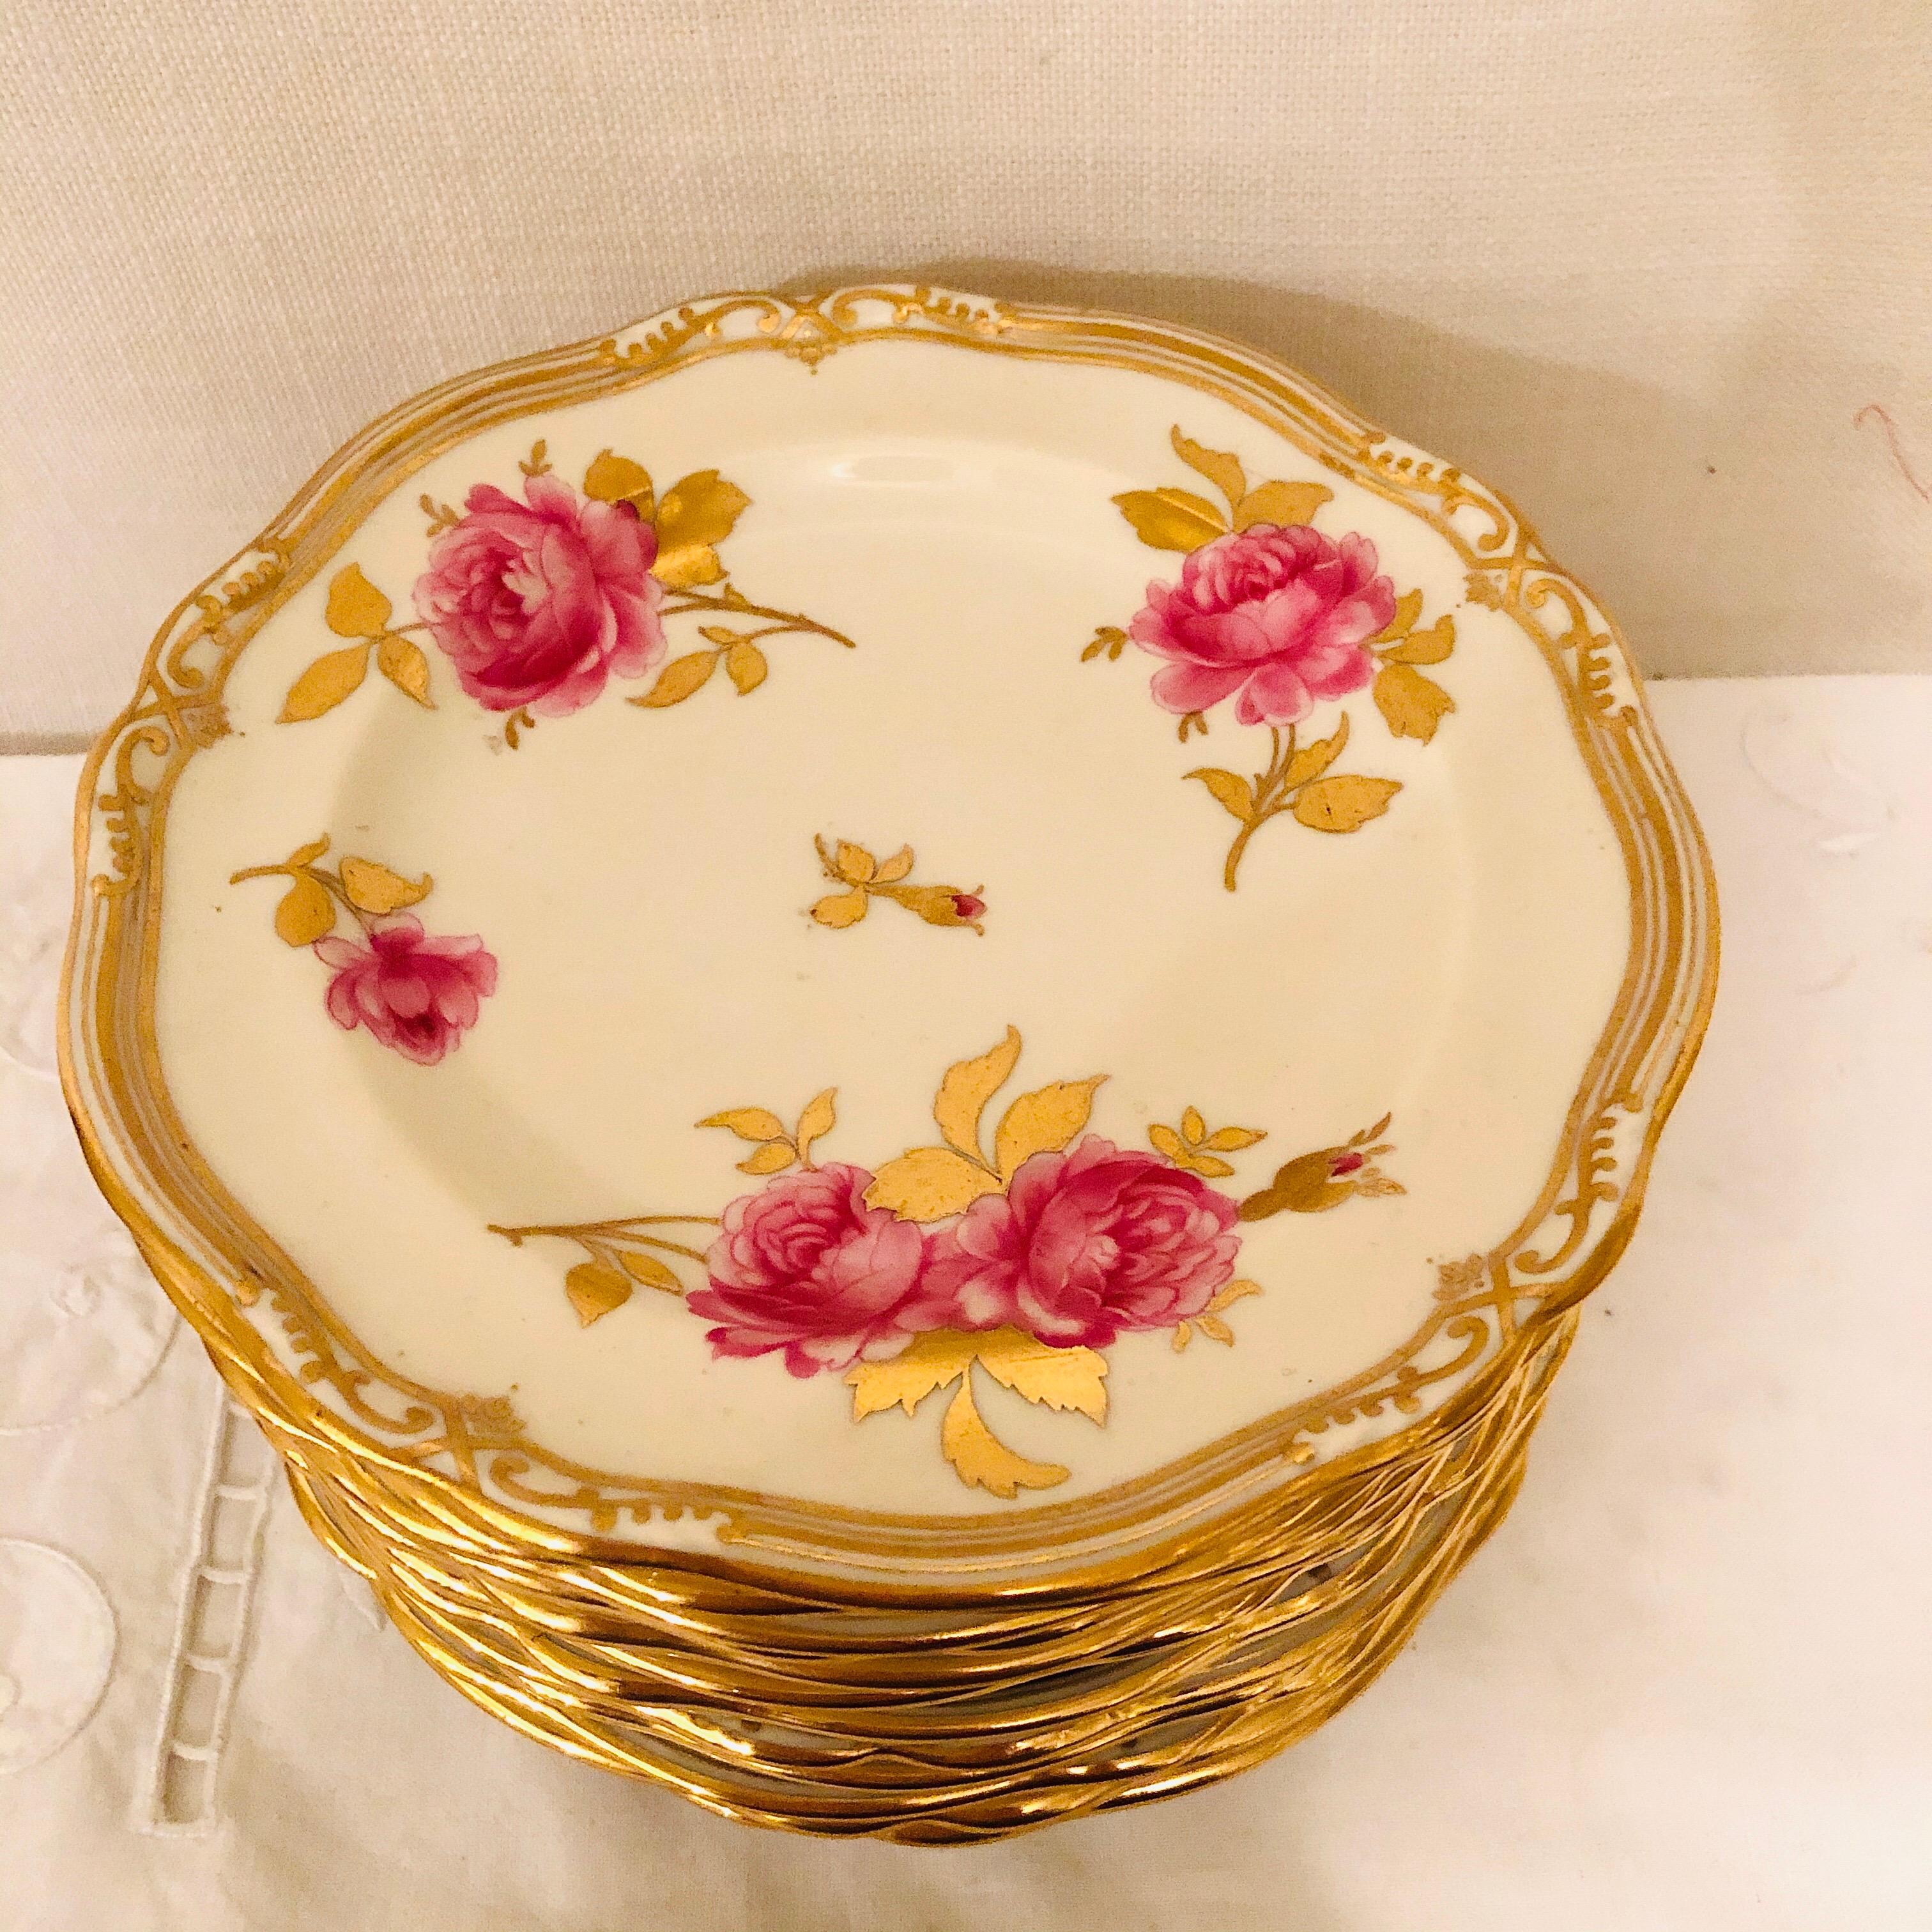 Spode Made for Tiffany 68 Piece Dinner Service Decorated with Large Pink Roses 1